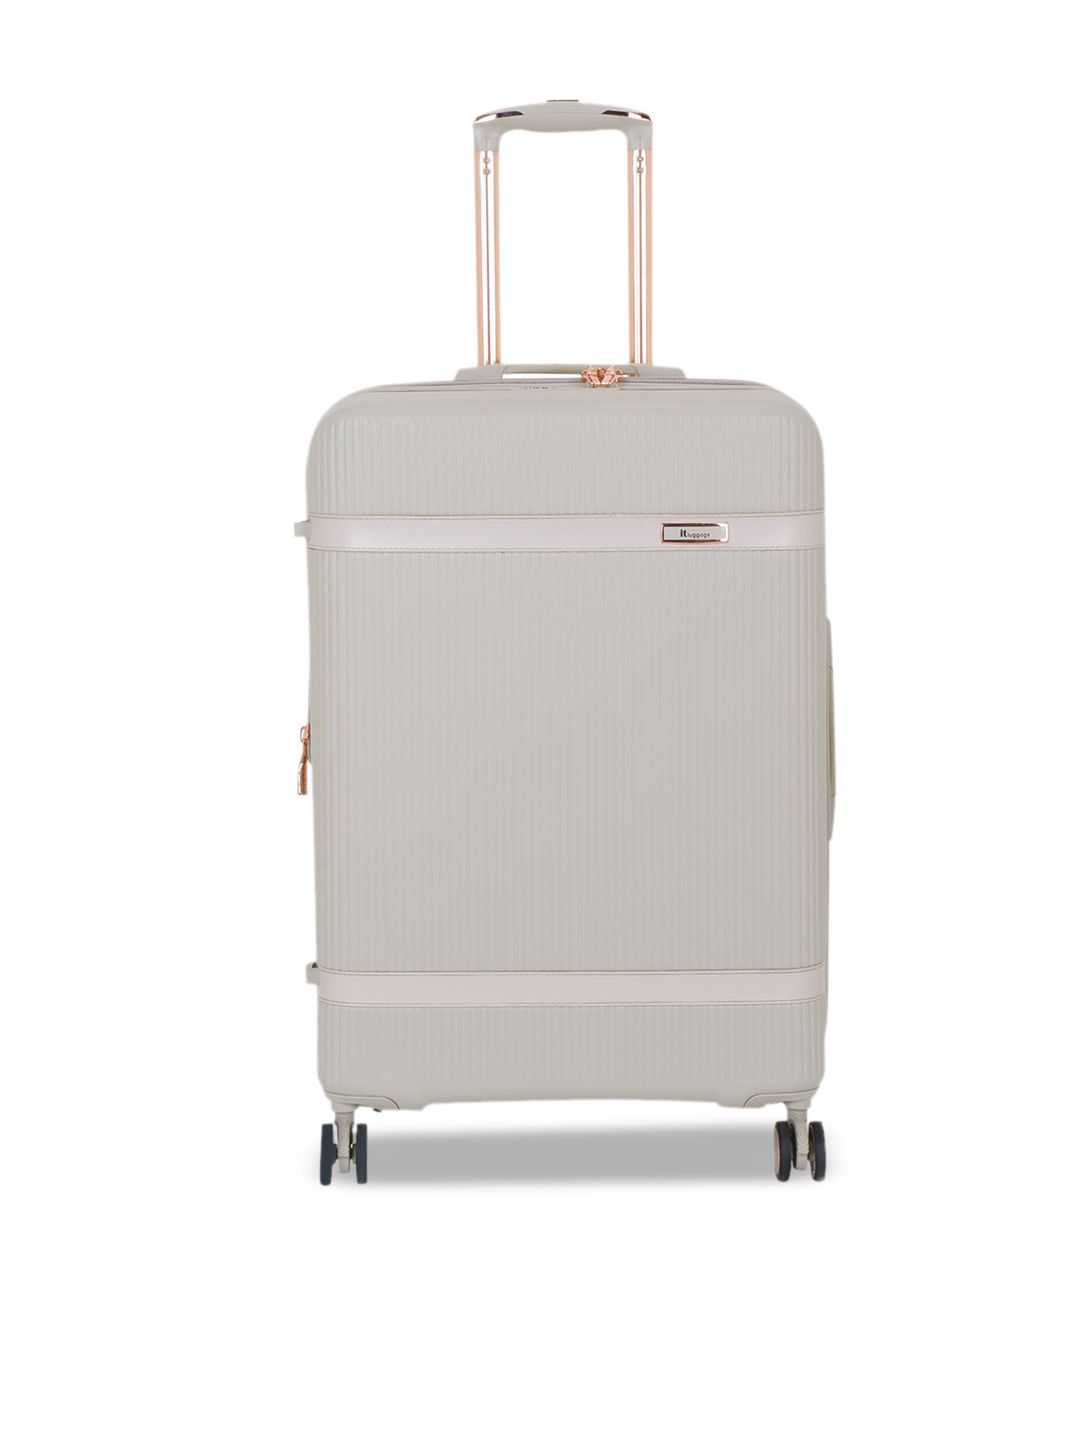 IT luggage Grey Solid Hard-Sided Trolley Suitcase Price in India